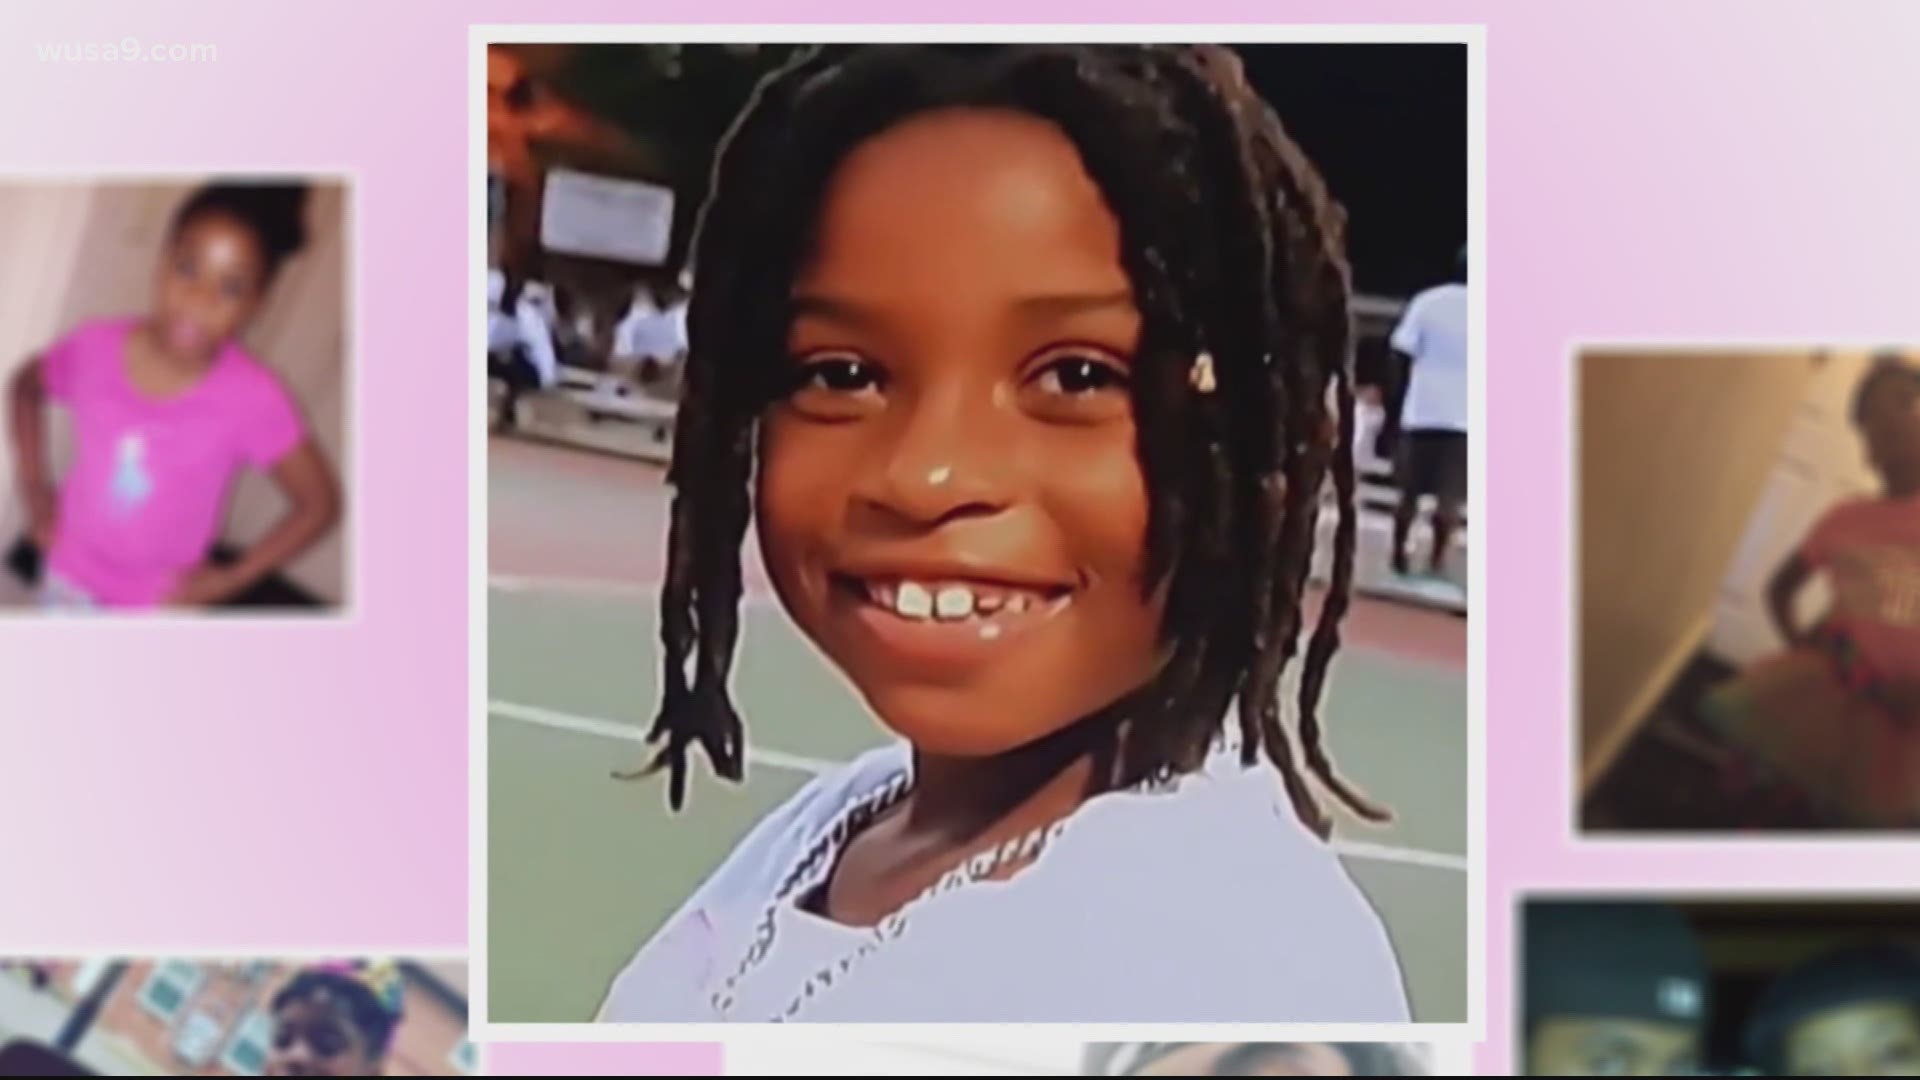 Three years after the murder of Makiyah Wilson, her family remembers her as an "angel on Earth."